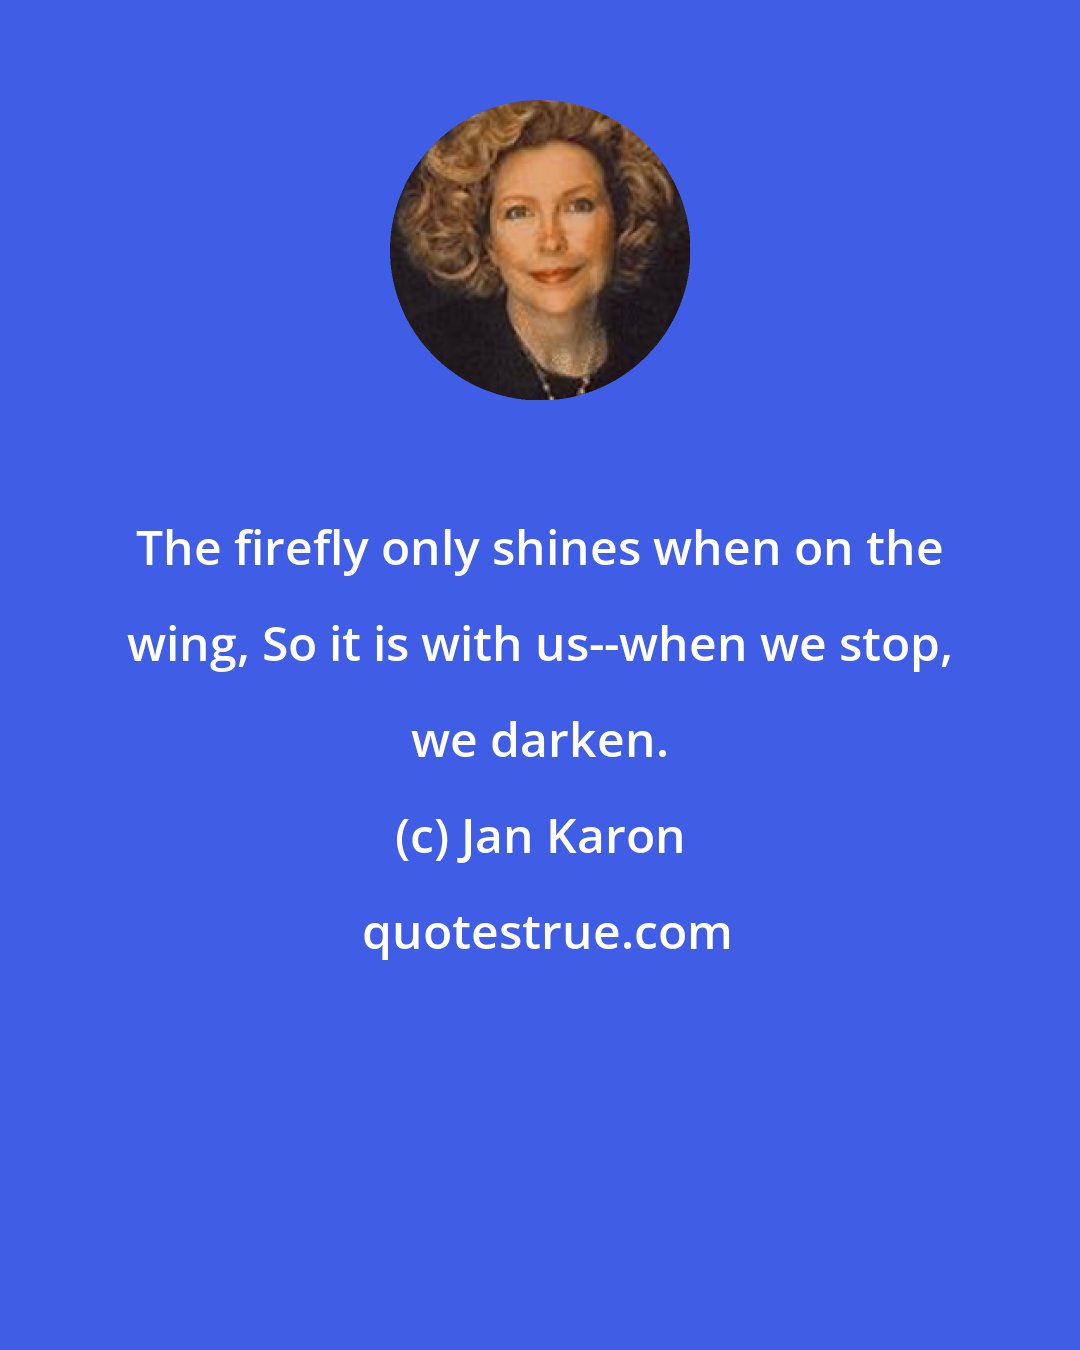 Jan Karon: The firefly only shines when on the wing, So it is with us--when we stop, we darken.